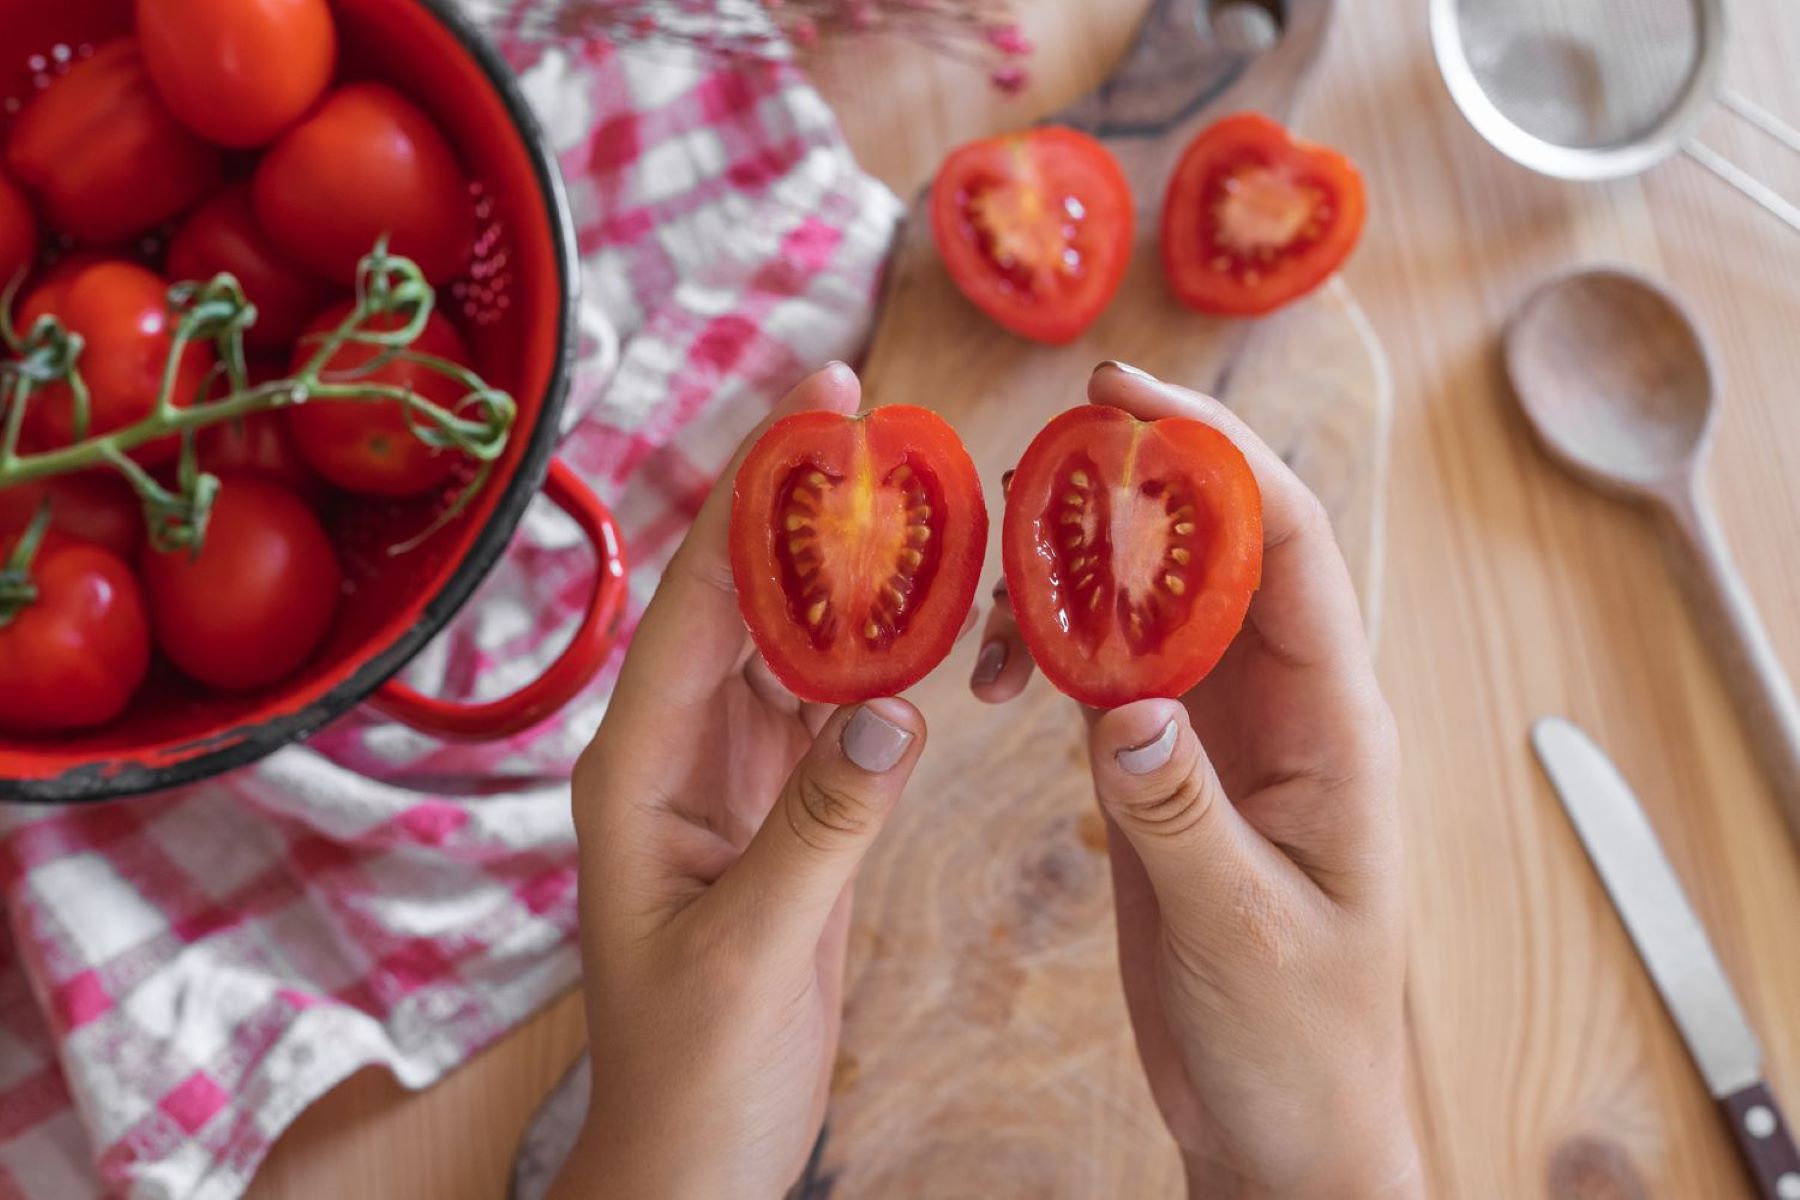 How To Remove Seeds From Tomatoes